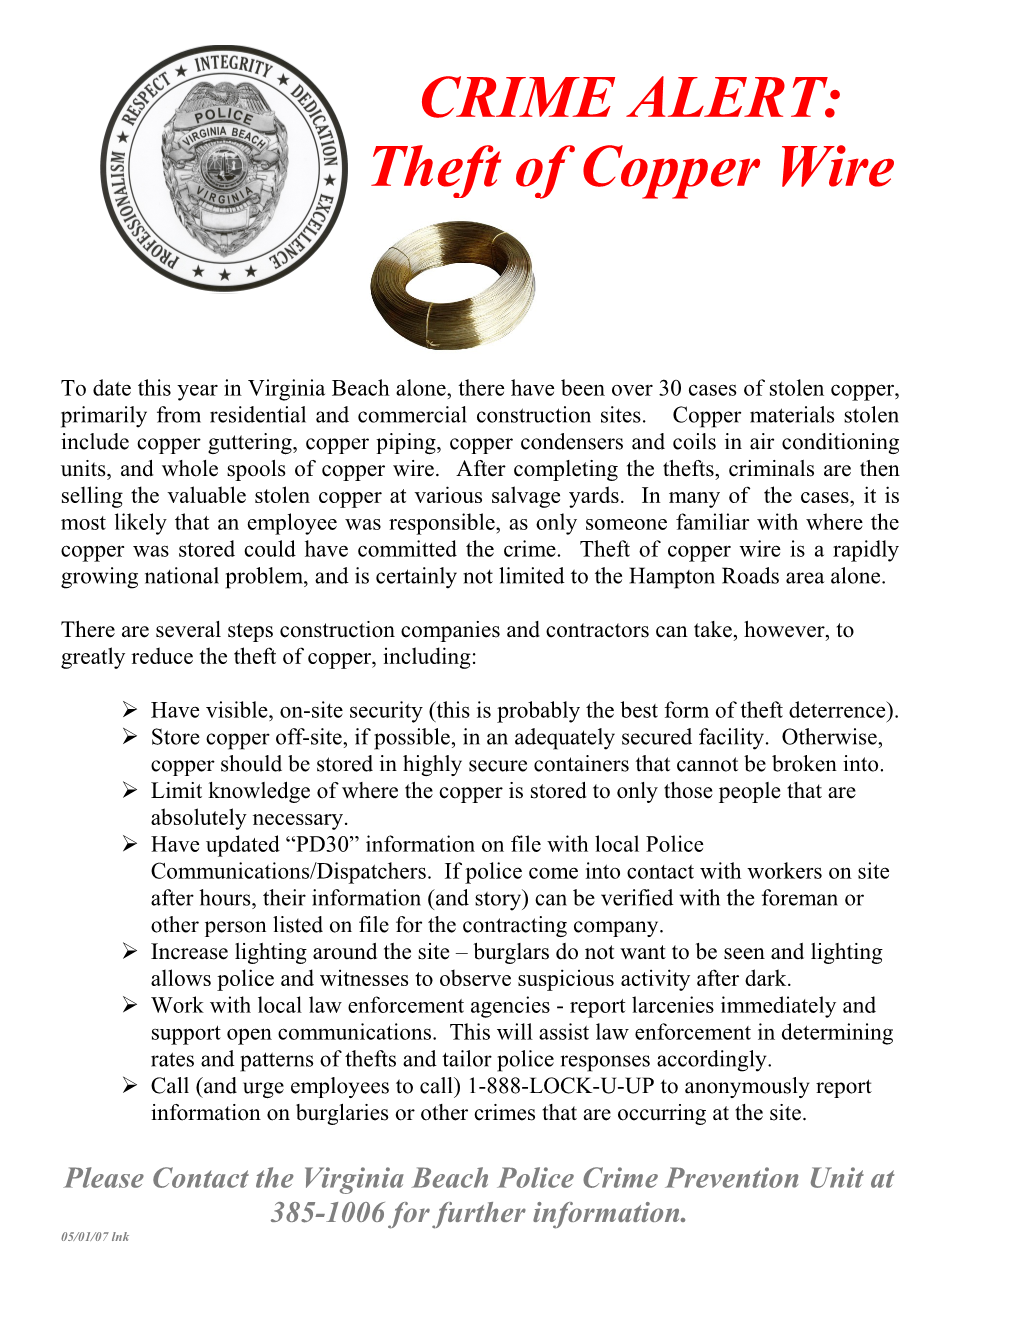 Theft of Copper Wire